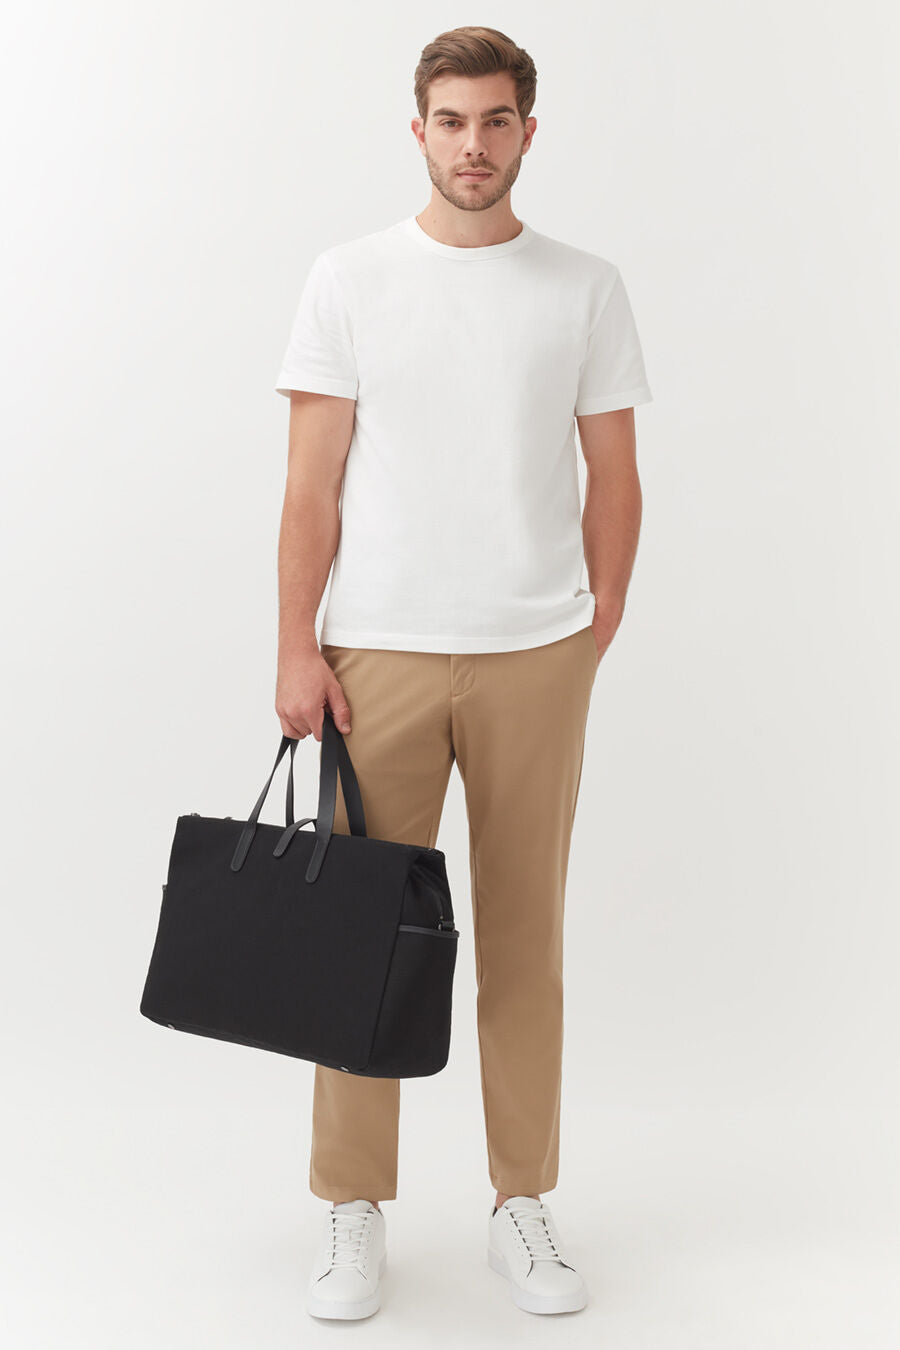 Man standing holding a bag and wearing a T-shirt and pants.